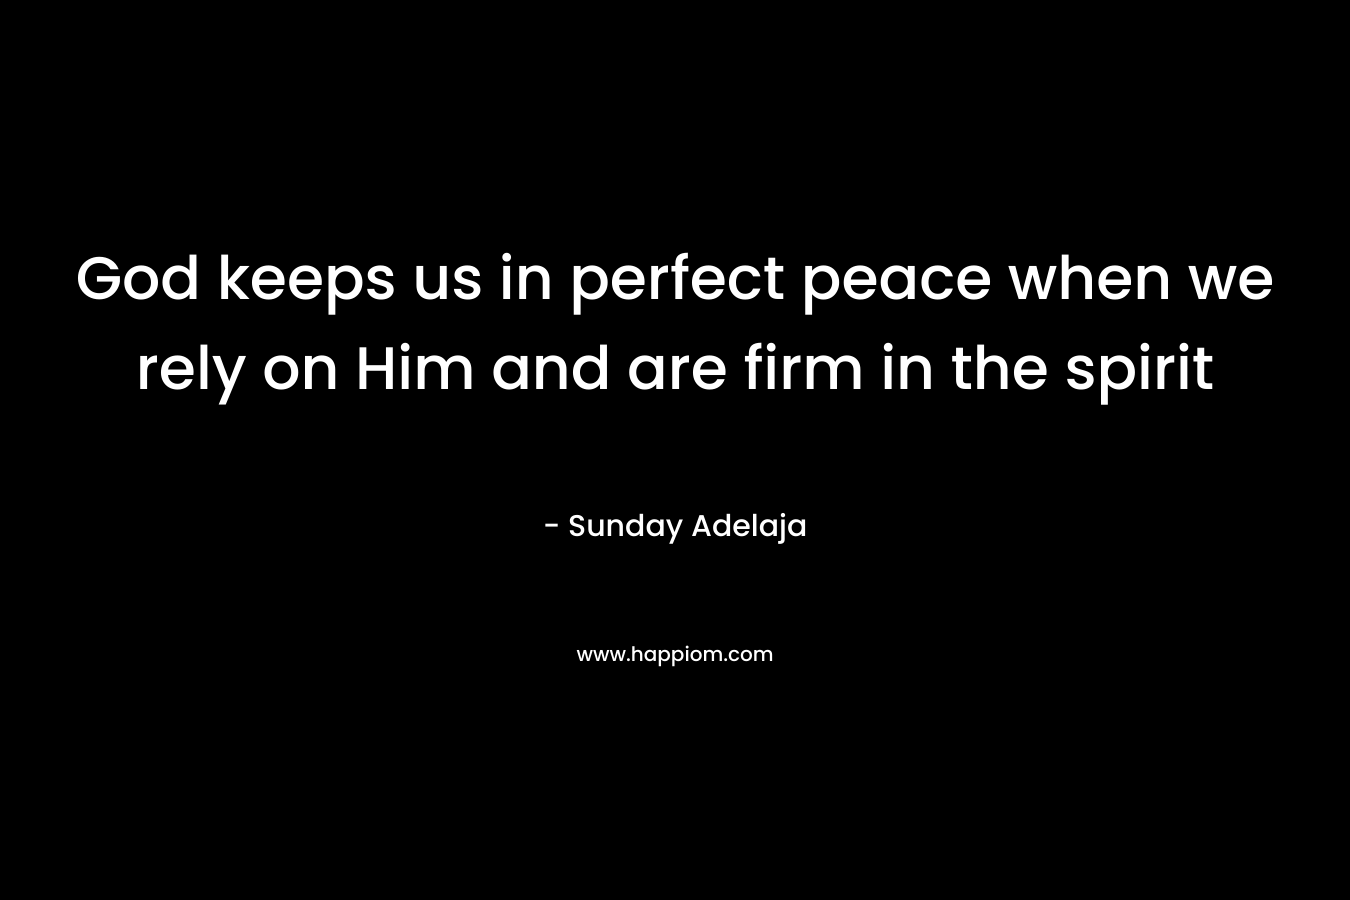 God keeps us in perfect peace when we rely on Him and are firm in the spirit